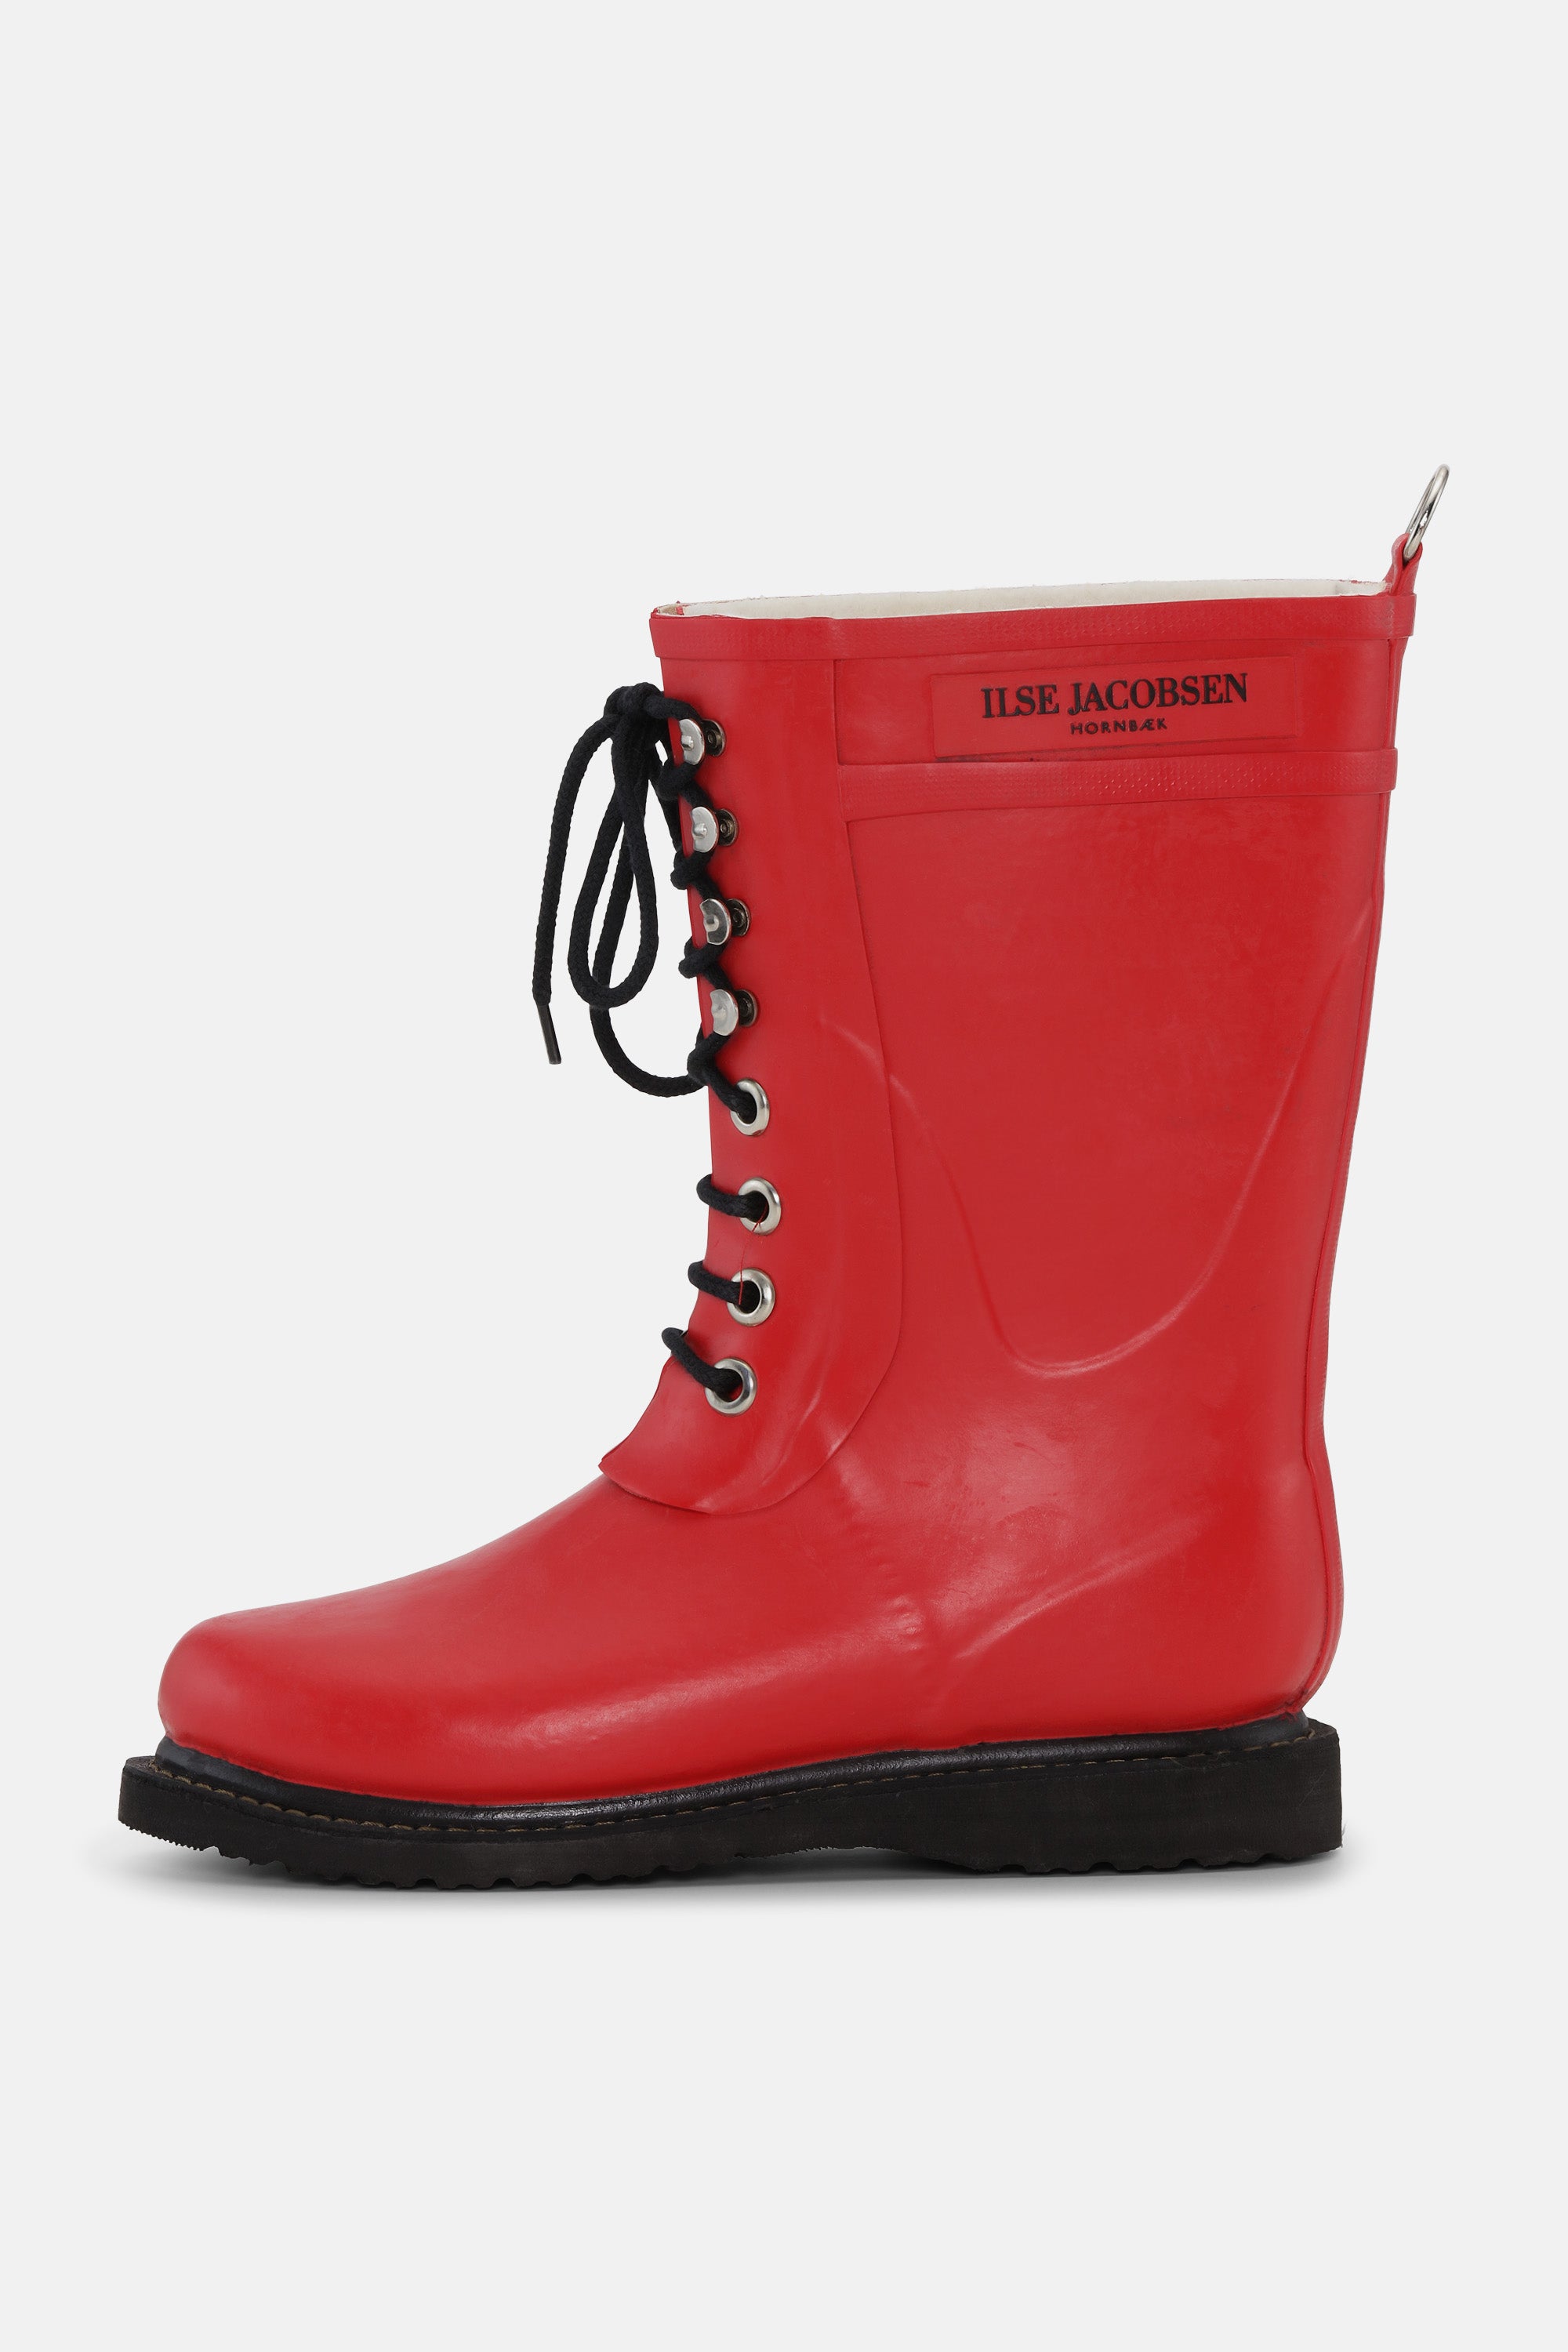 Handmade and stylish Rainboots made of Natural Rubber - ILSE JACOBSEN